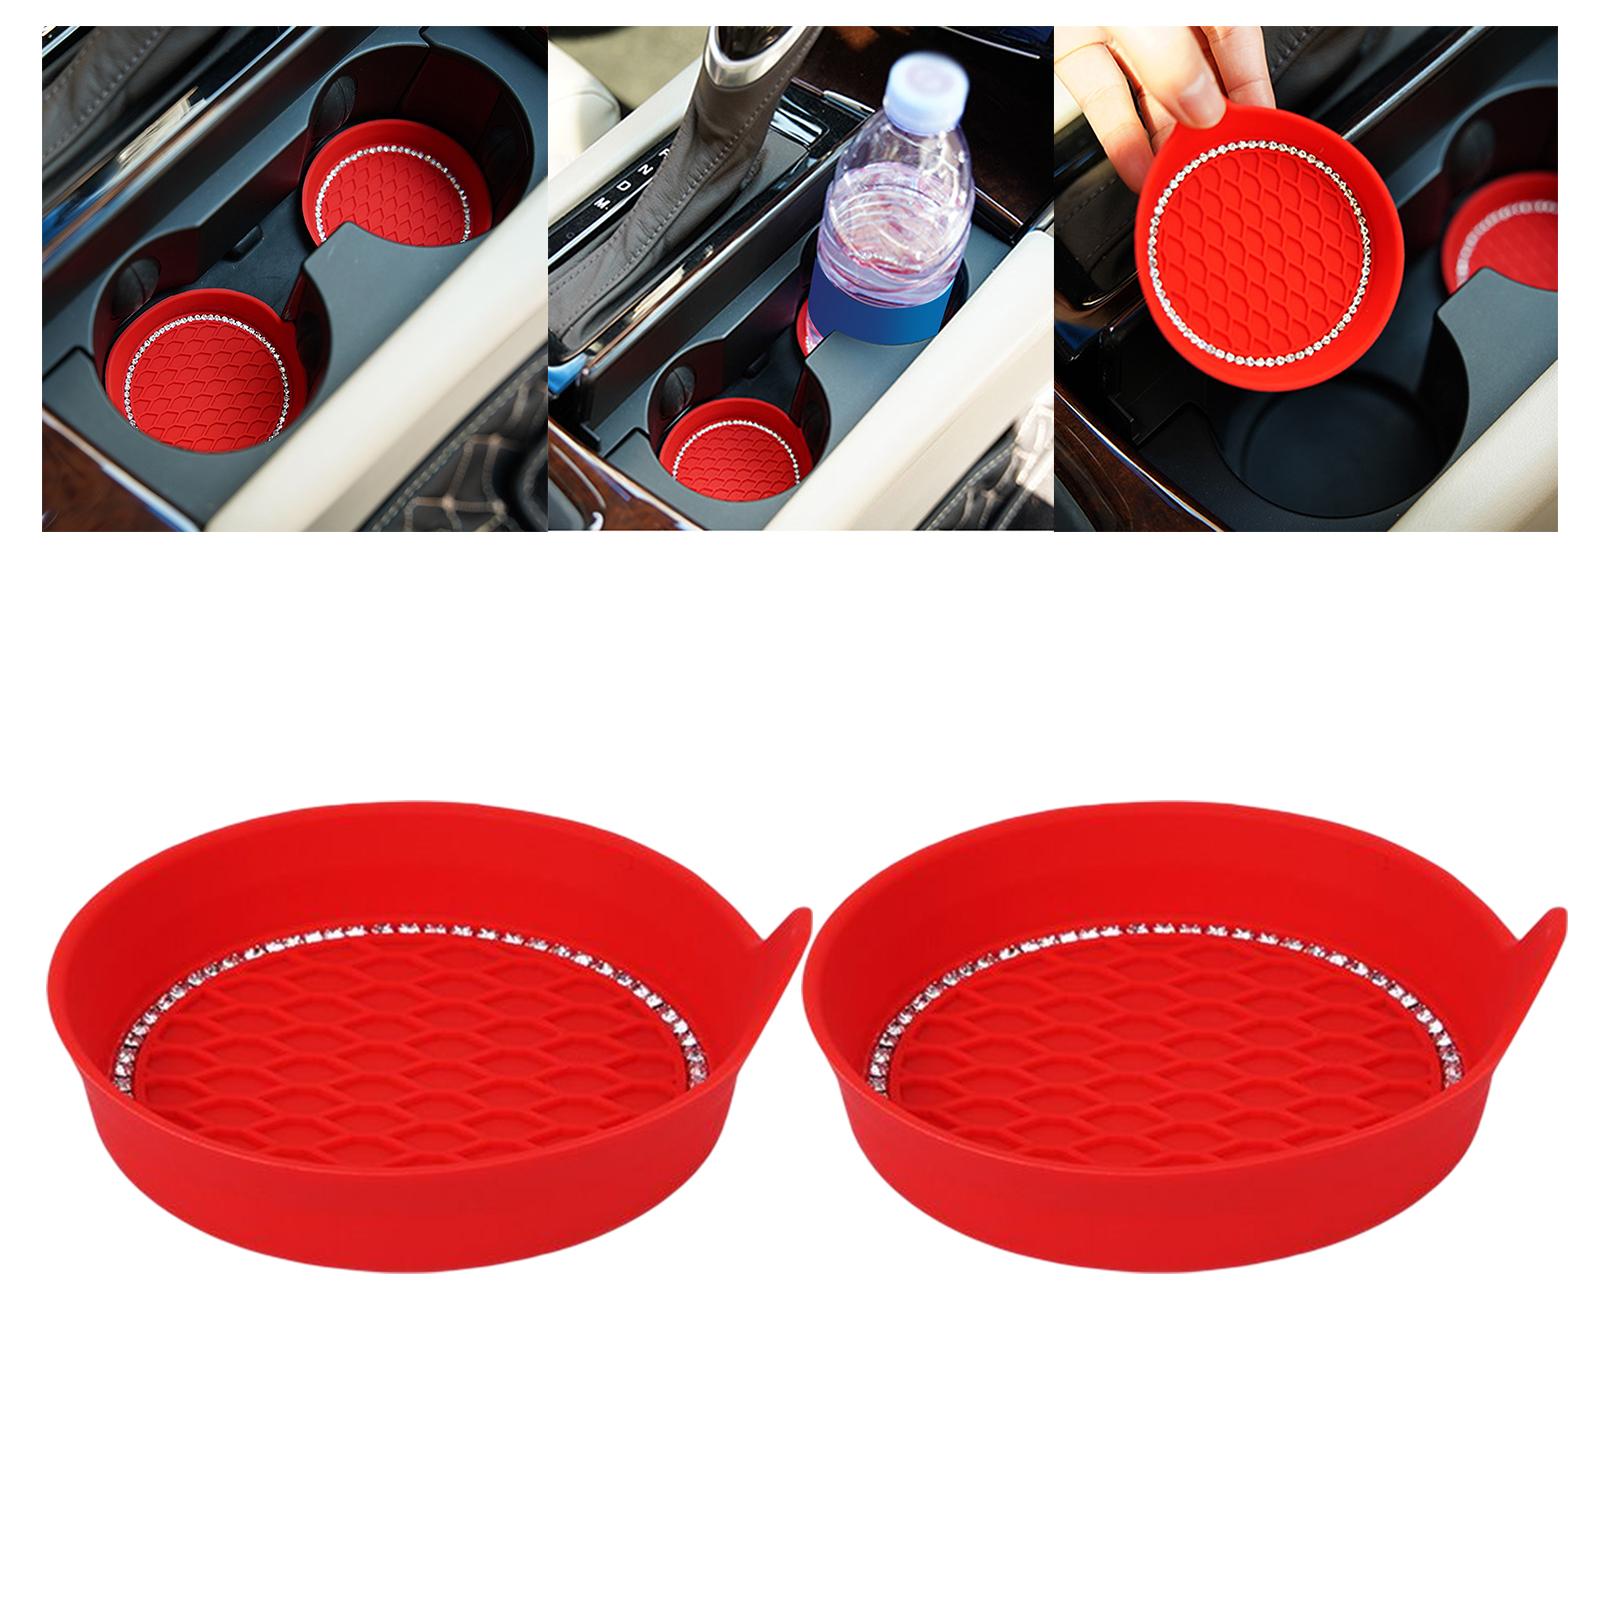 Auto Cup Insert Coaster round Vehicle Cup Mats for Party Office RV Red